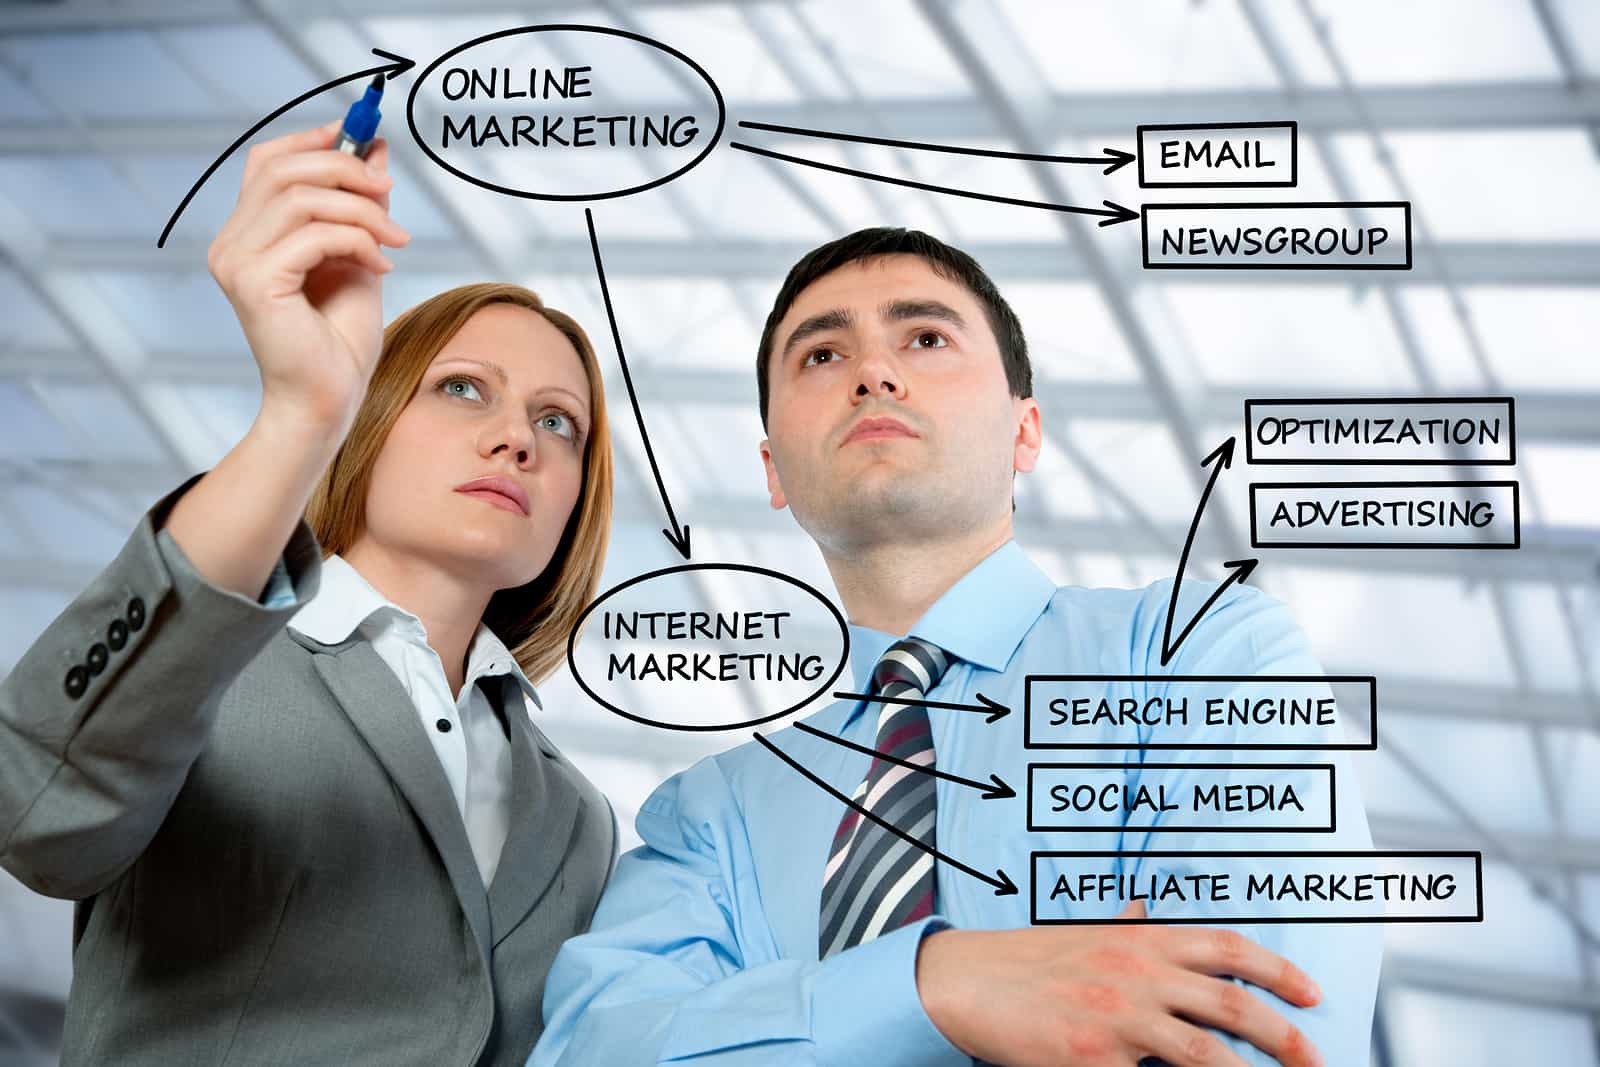 Online Marketing Company: What Services It Has In its Package